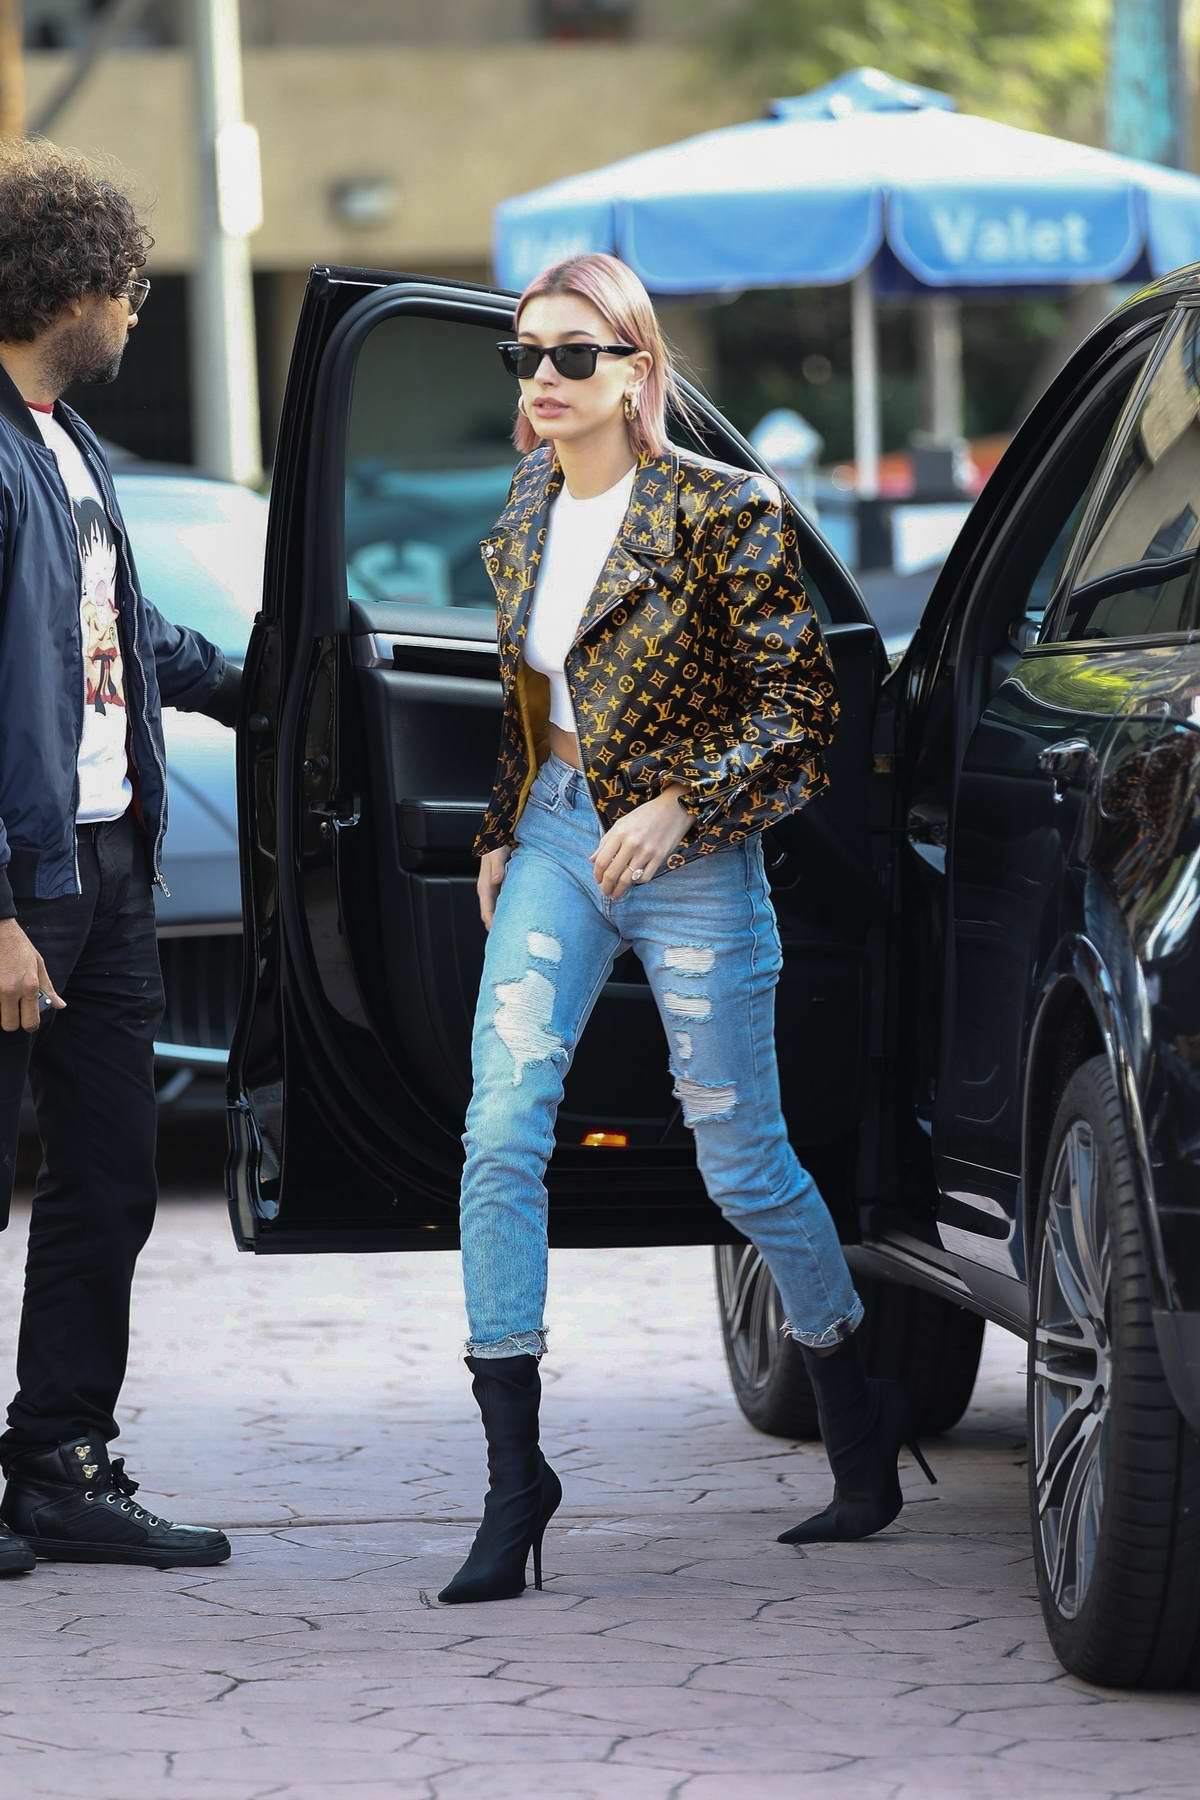 Hailey Baldwin at a Fitting for Louis Vuitton March 3, 2019 – Star